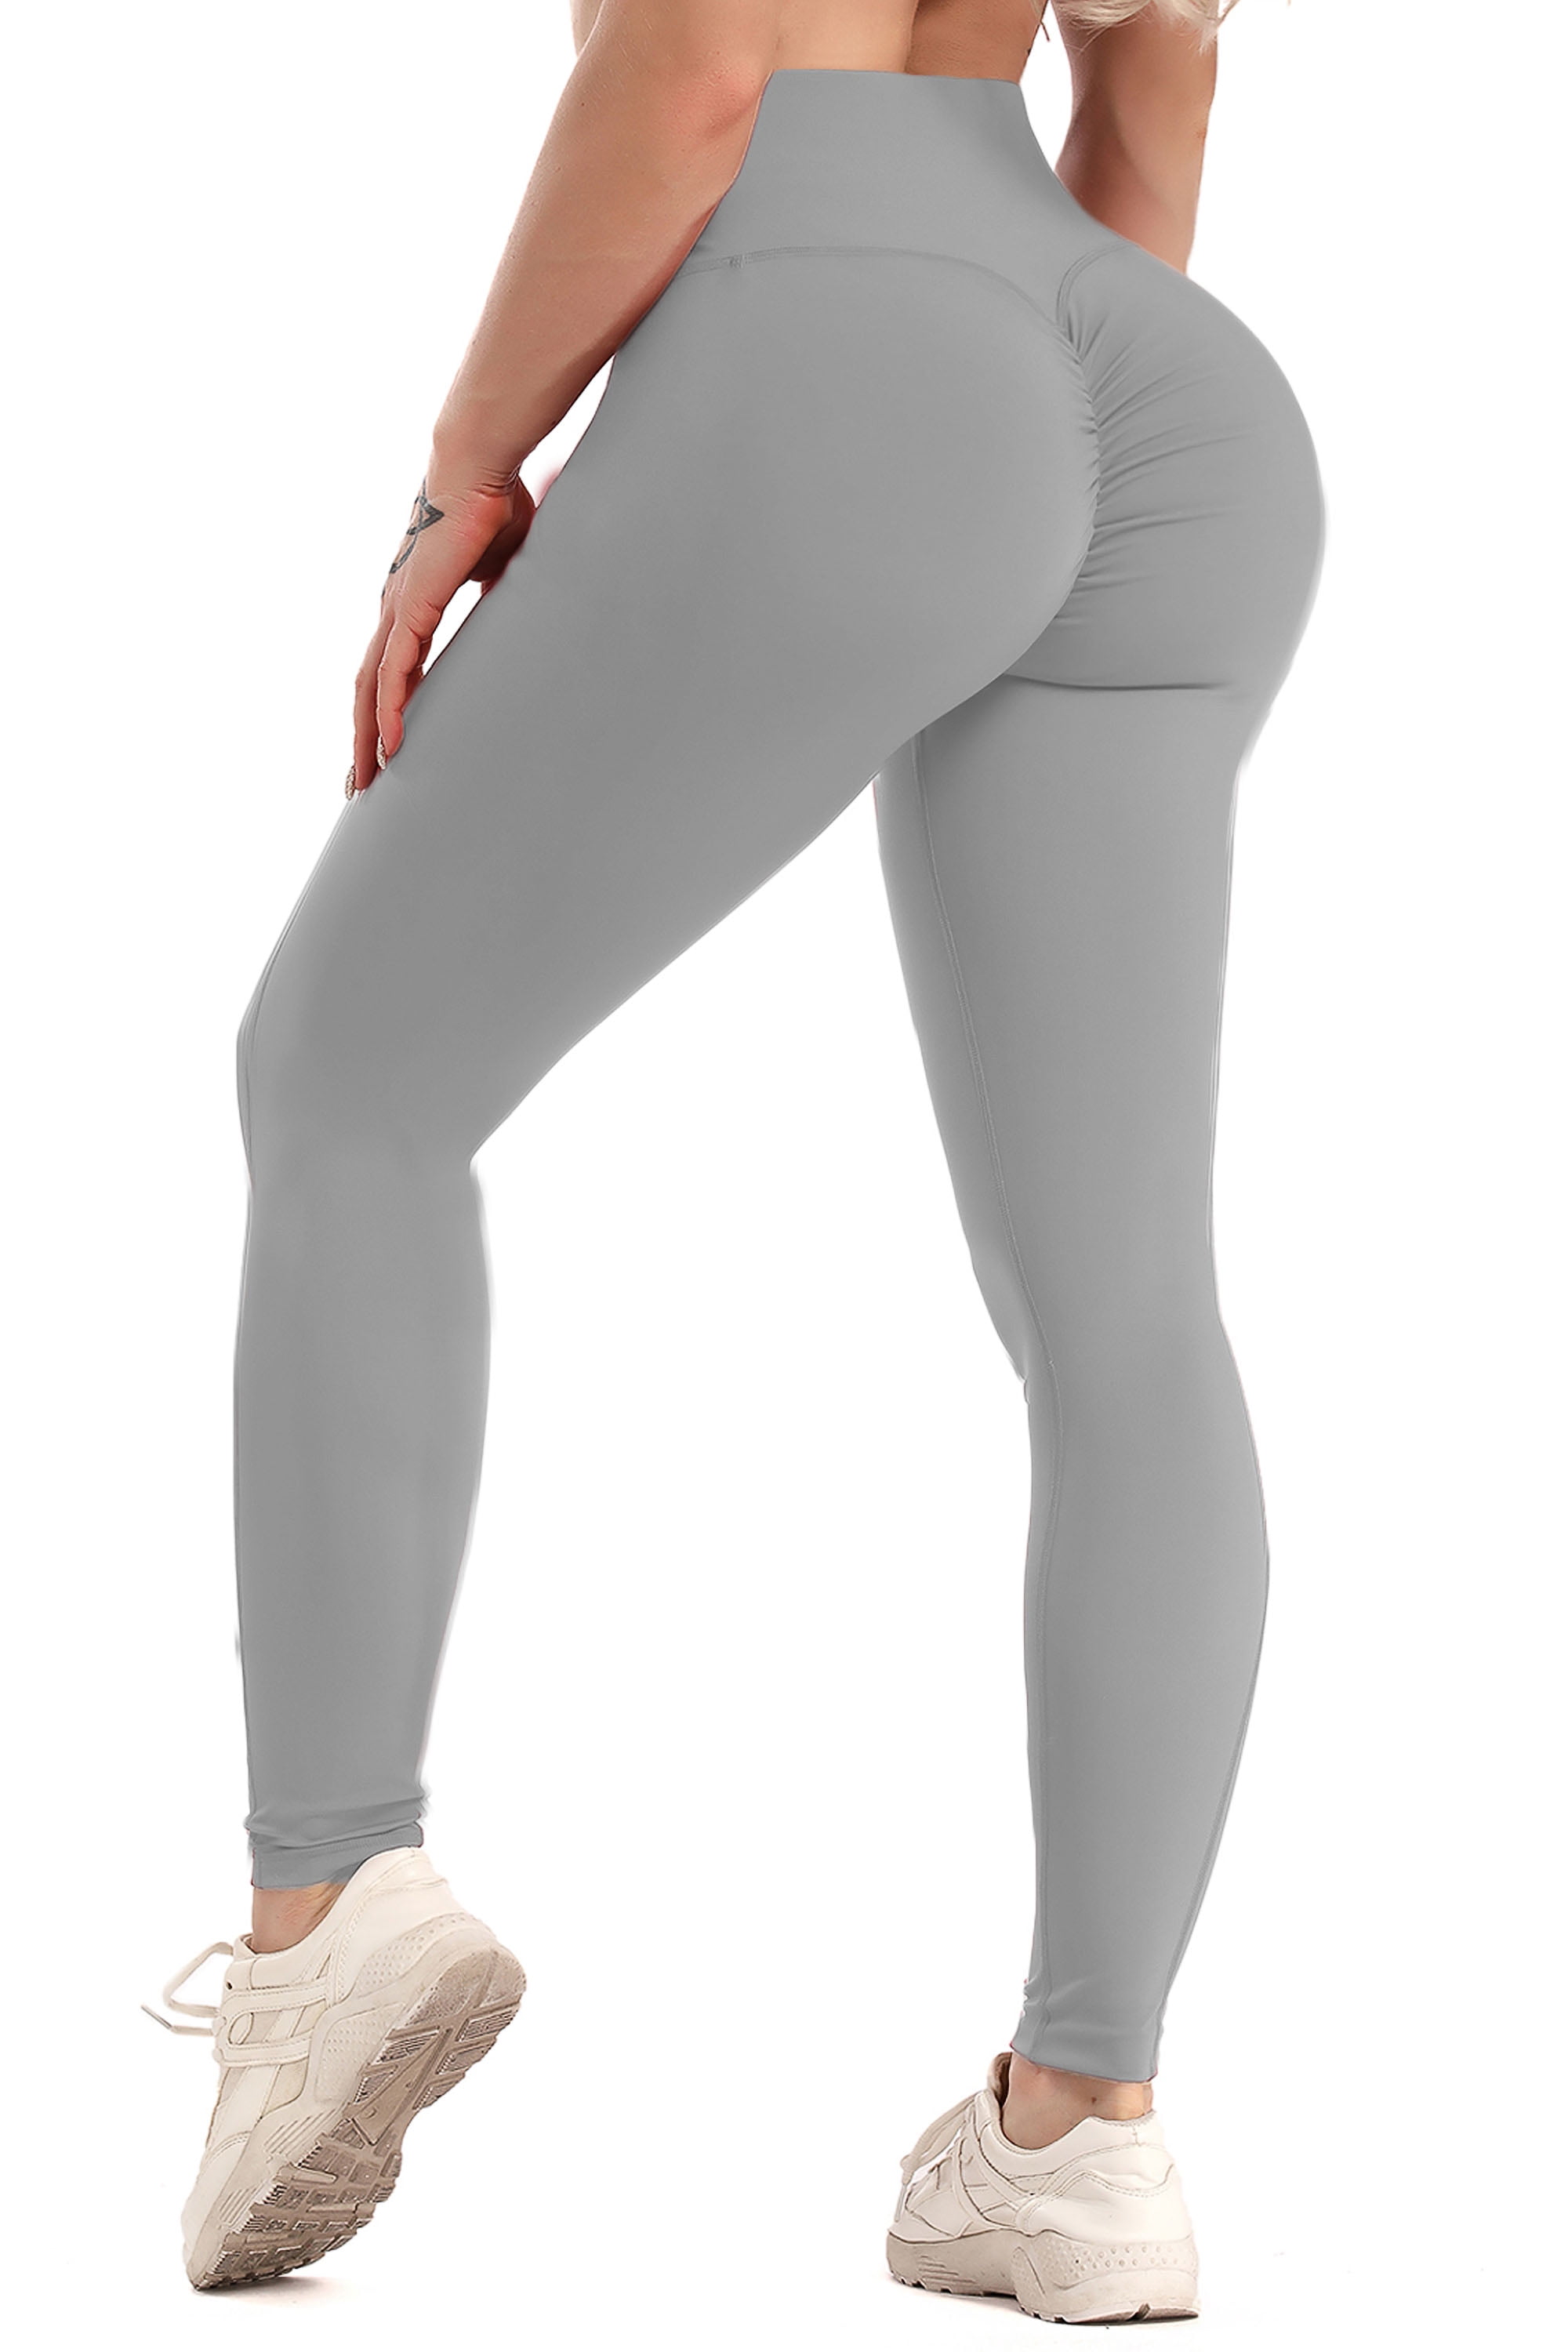 Women High Waist Yoga Pants Booty Push Up Leggings Ruched Gym Sports Trousers US 